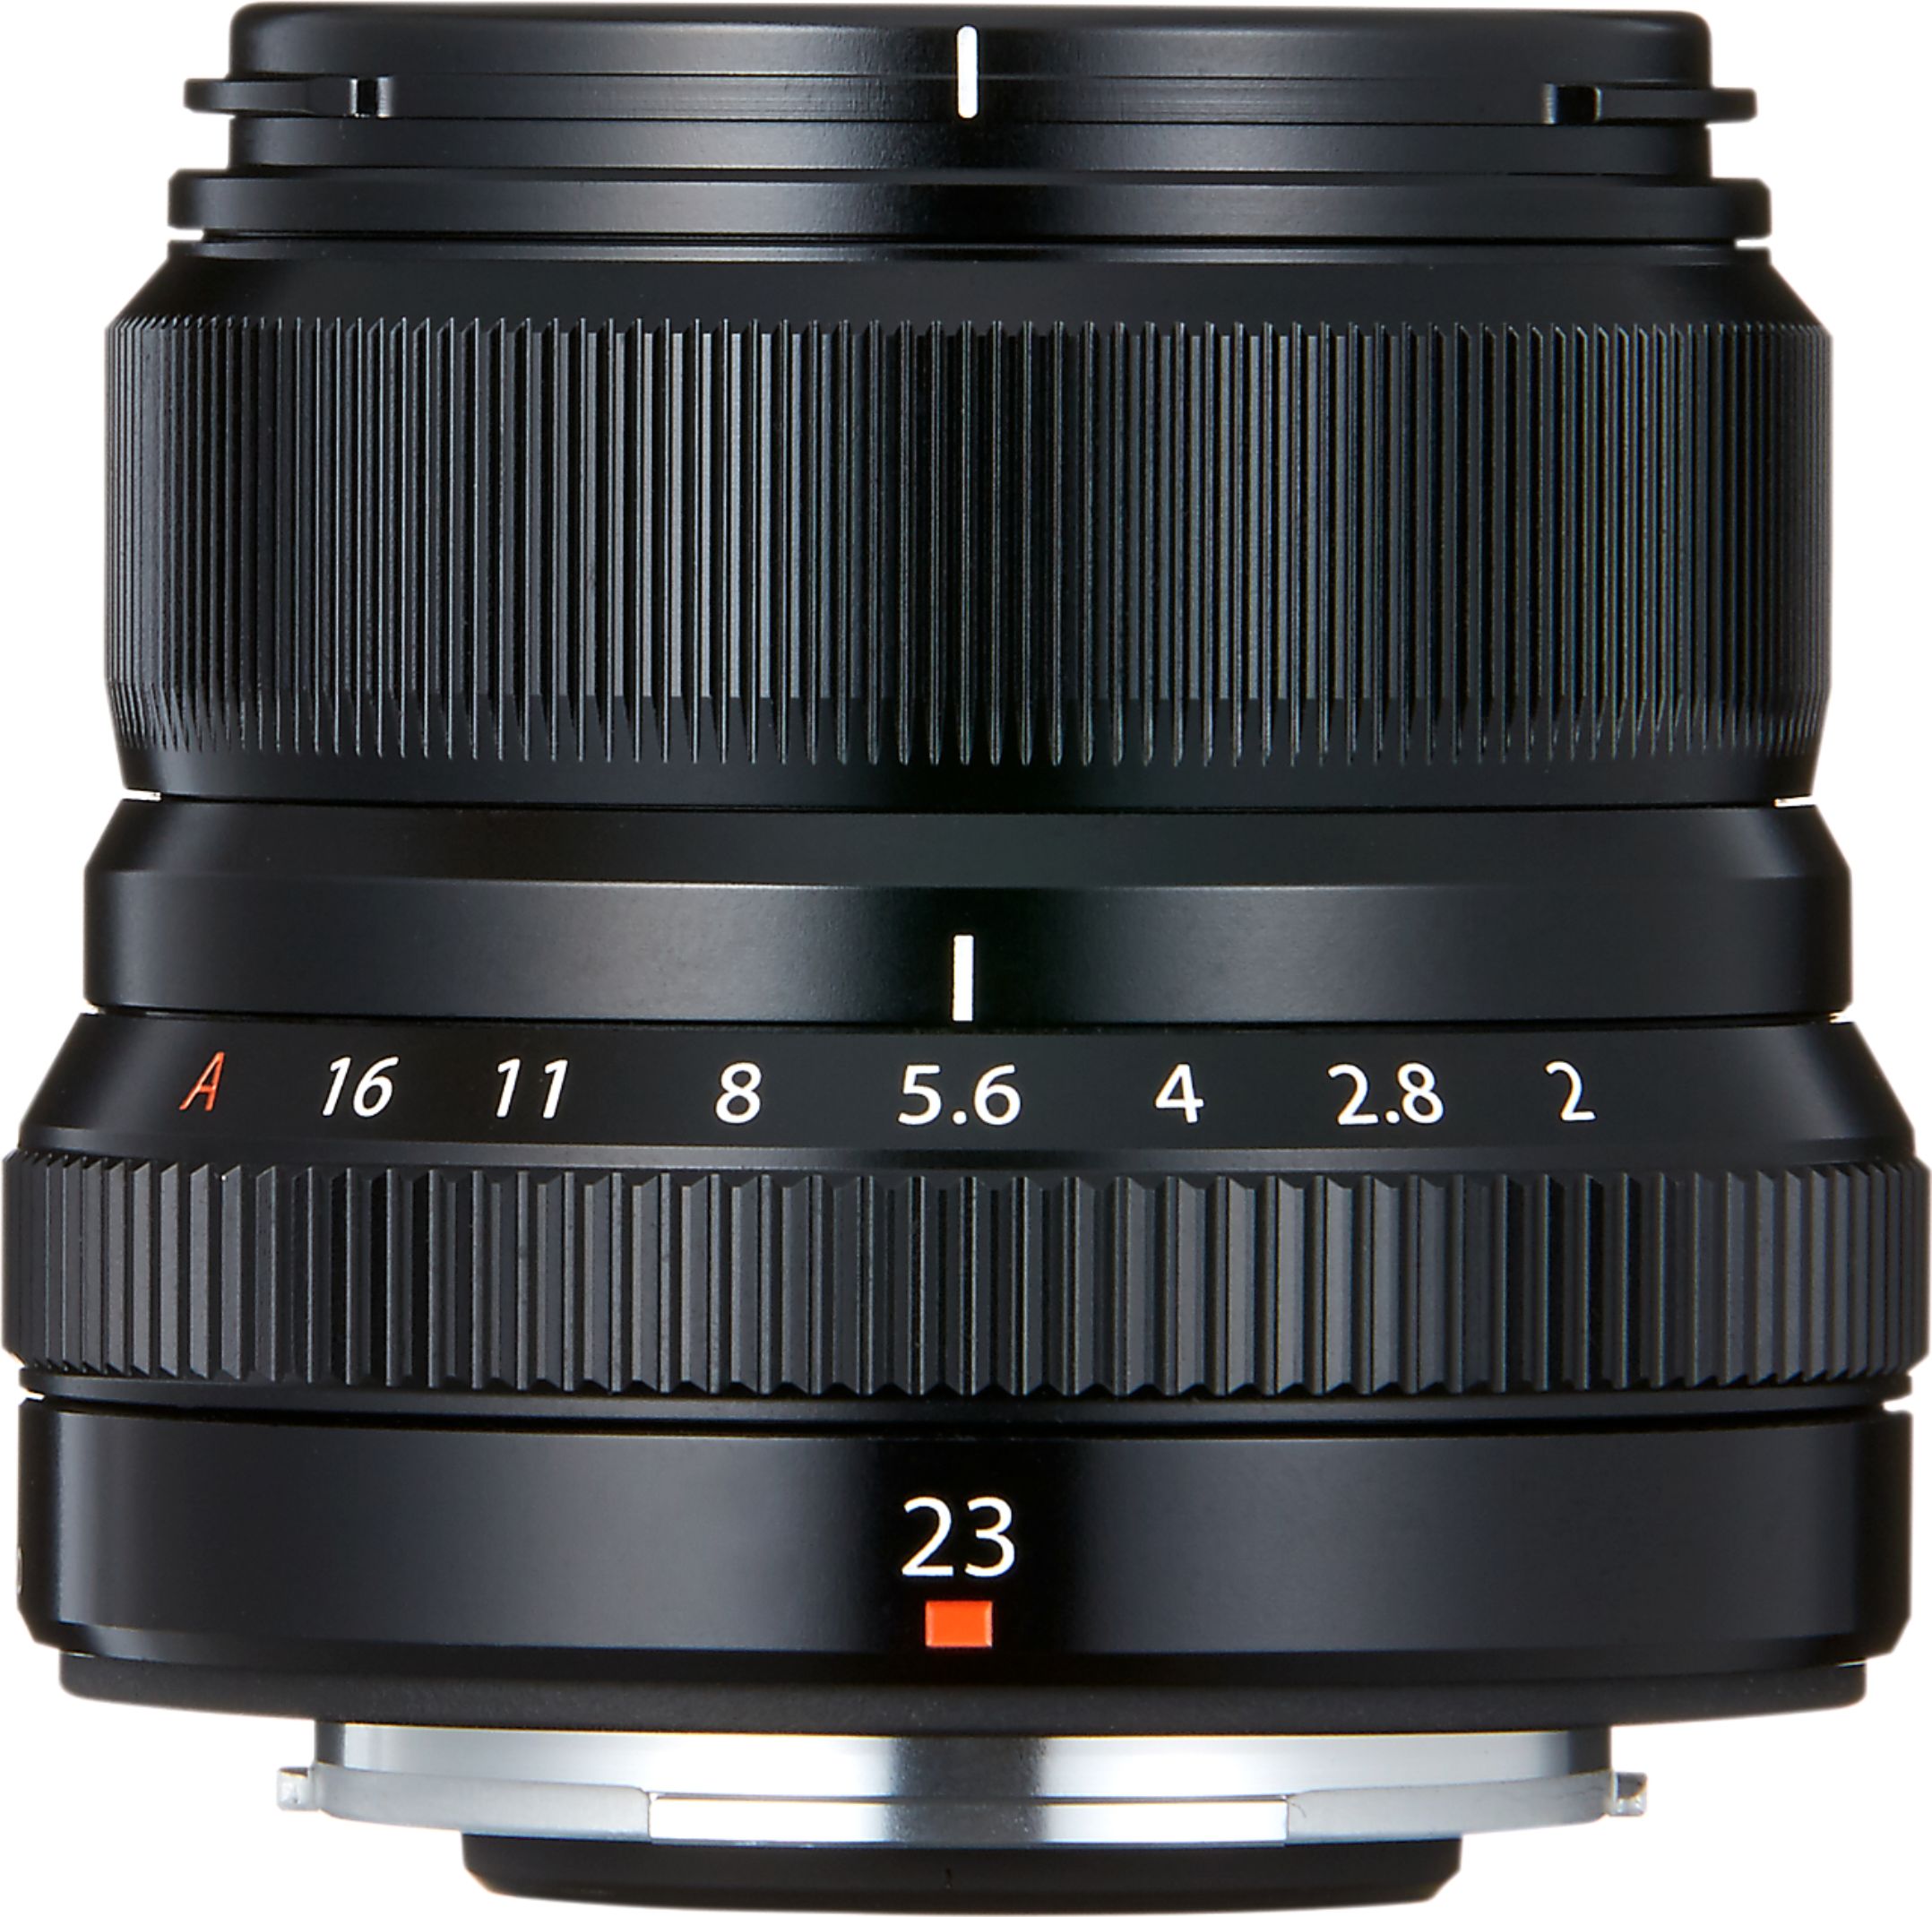 XF23mmF2 R WR Wide-angle Lens for Fujifilm X-Mount System Cameras Black  16523169 - Best Buy